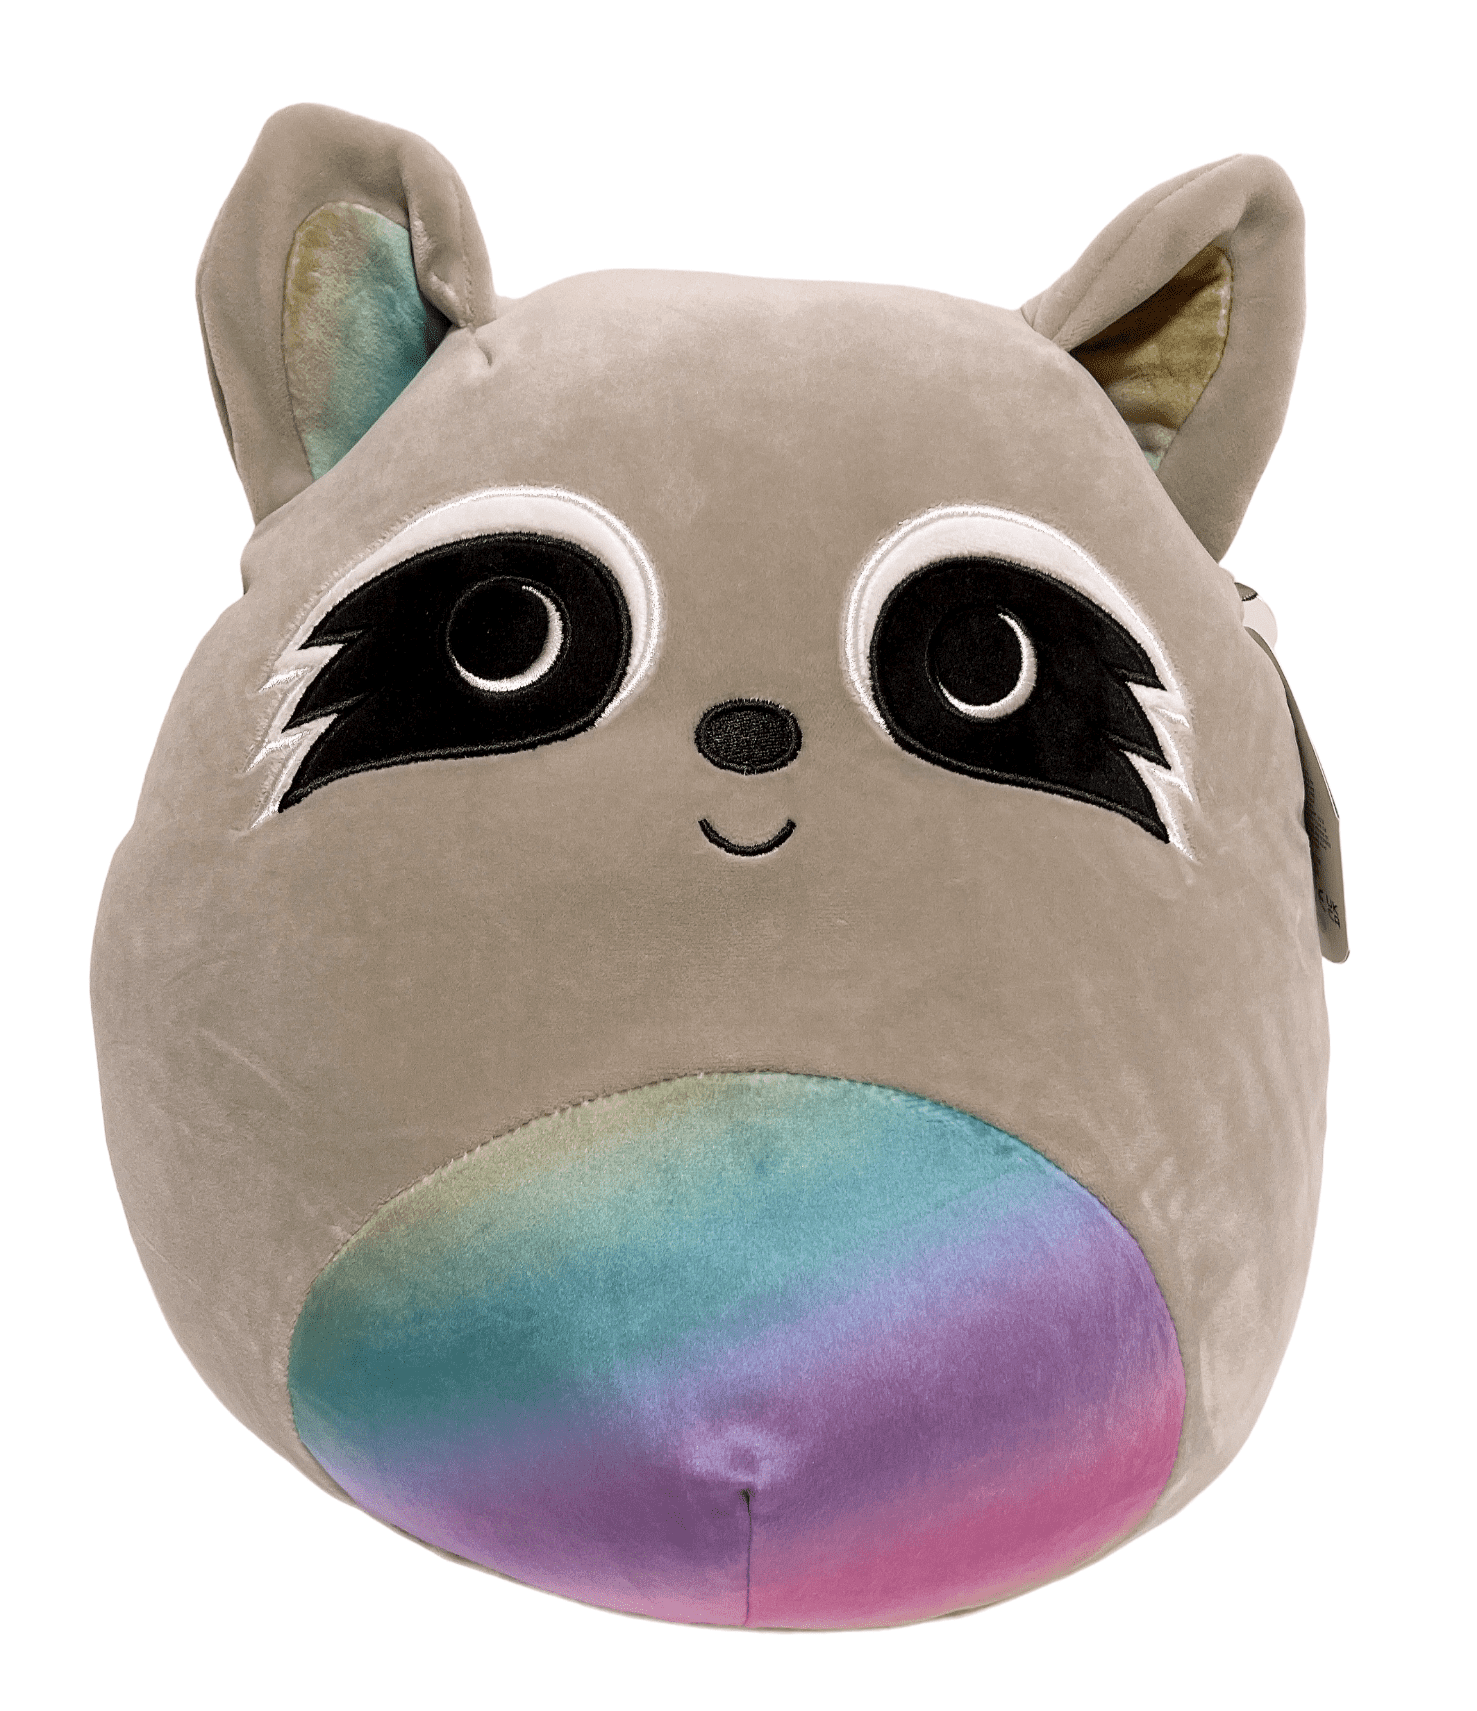 Squishmallows 12 Best Sellers Squad - Soft Squish Animal Plush Toy